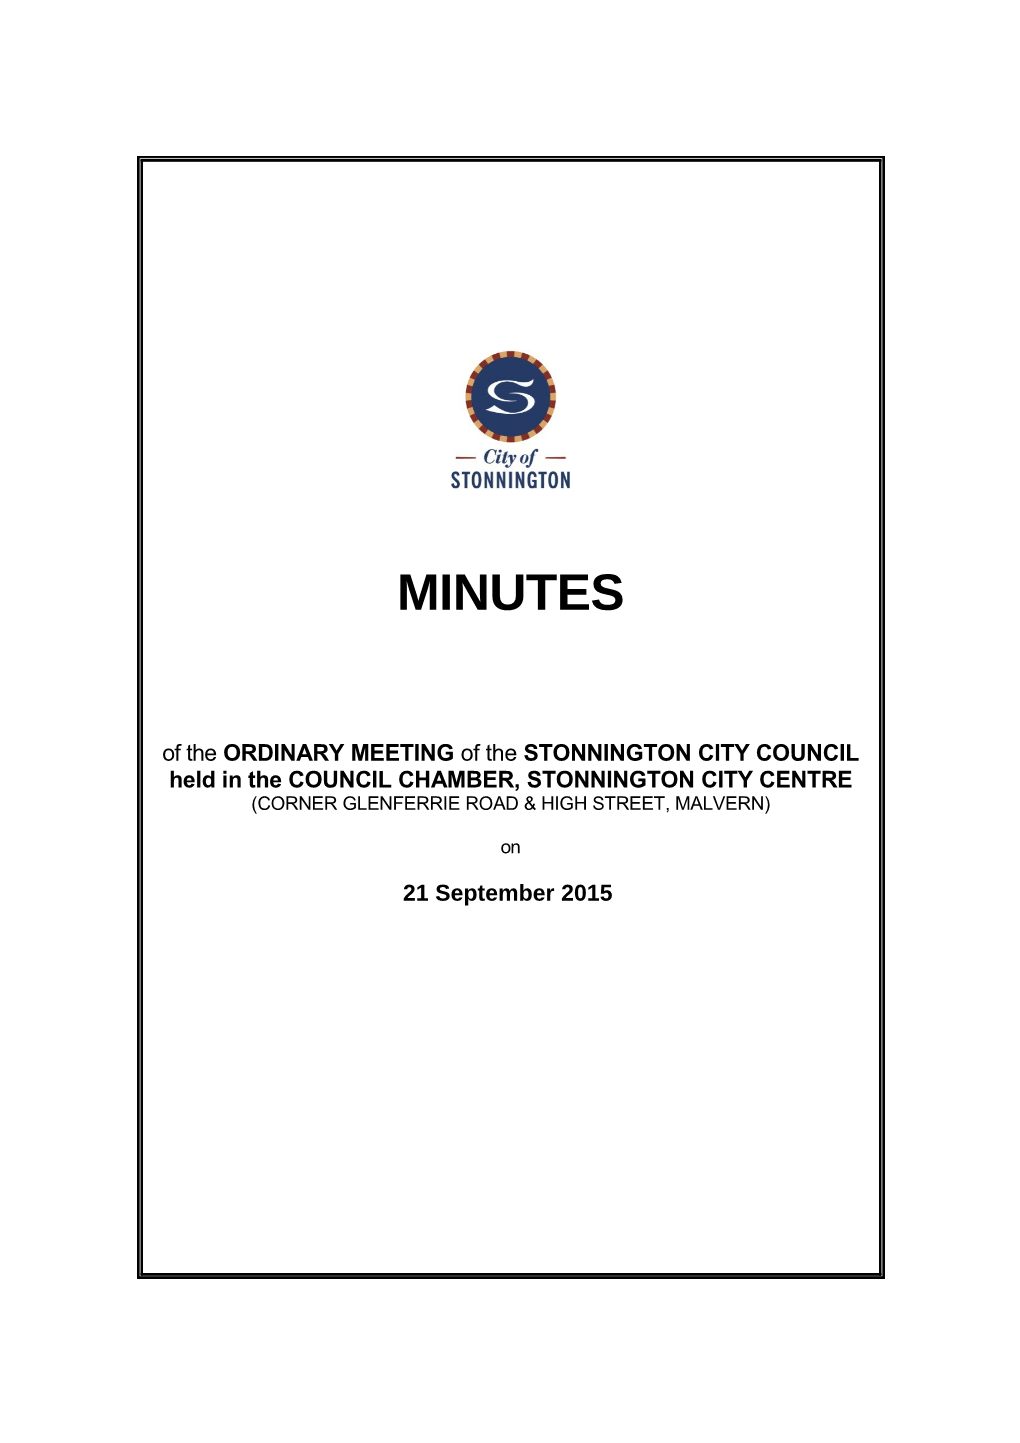 Minutes of Council Meeting - 21 September 2015